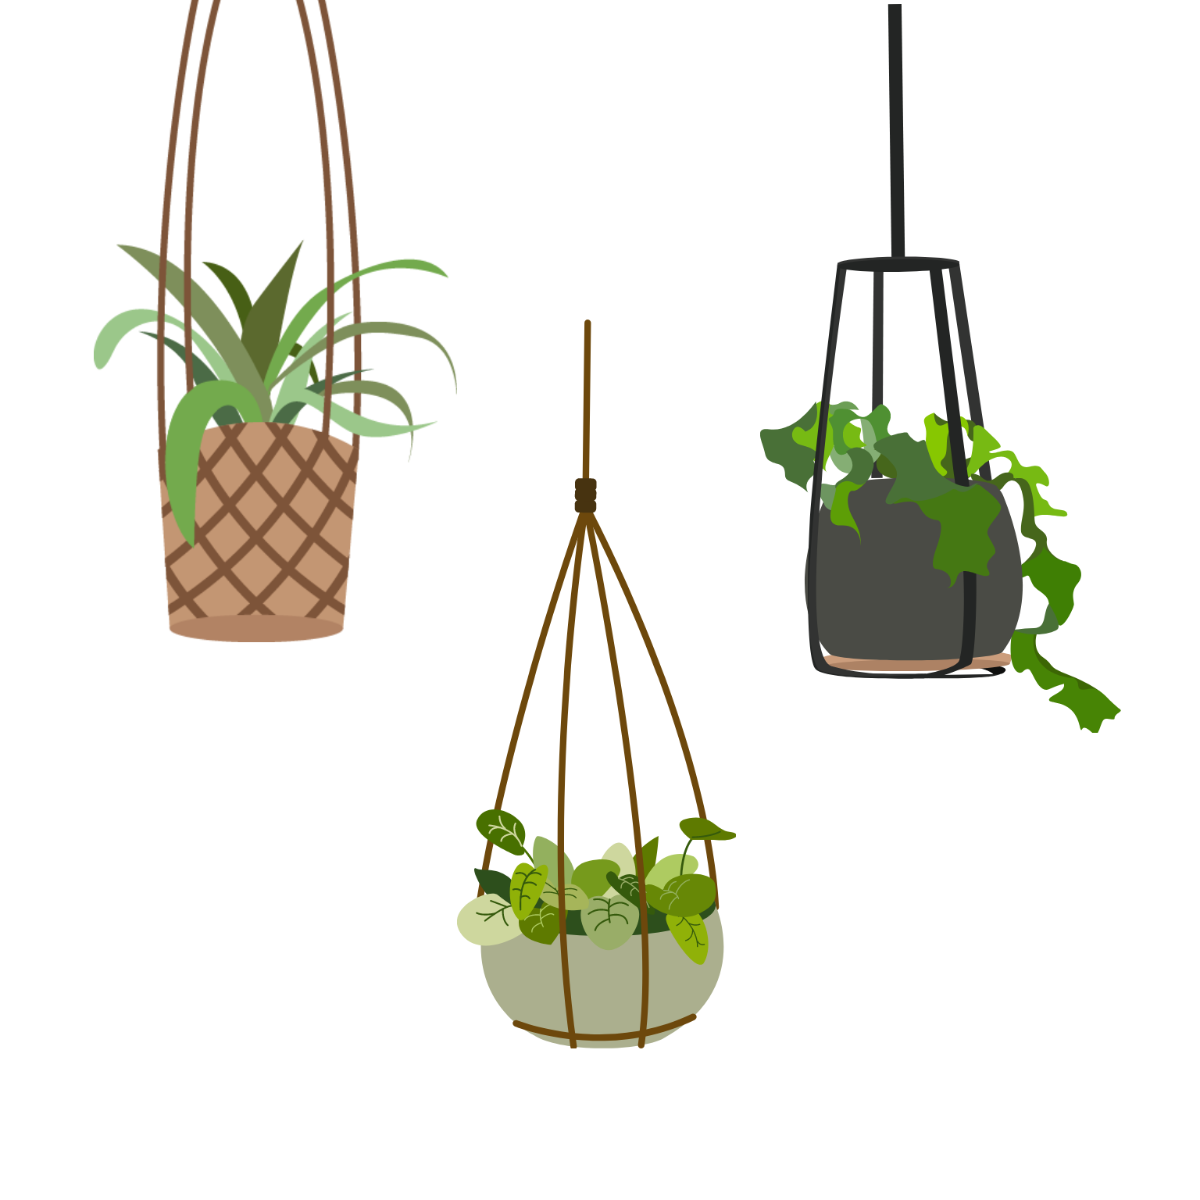 Hanging Plant Vector Template